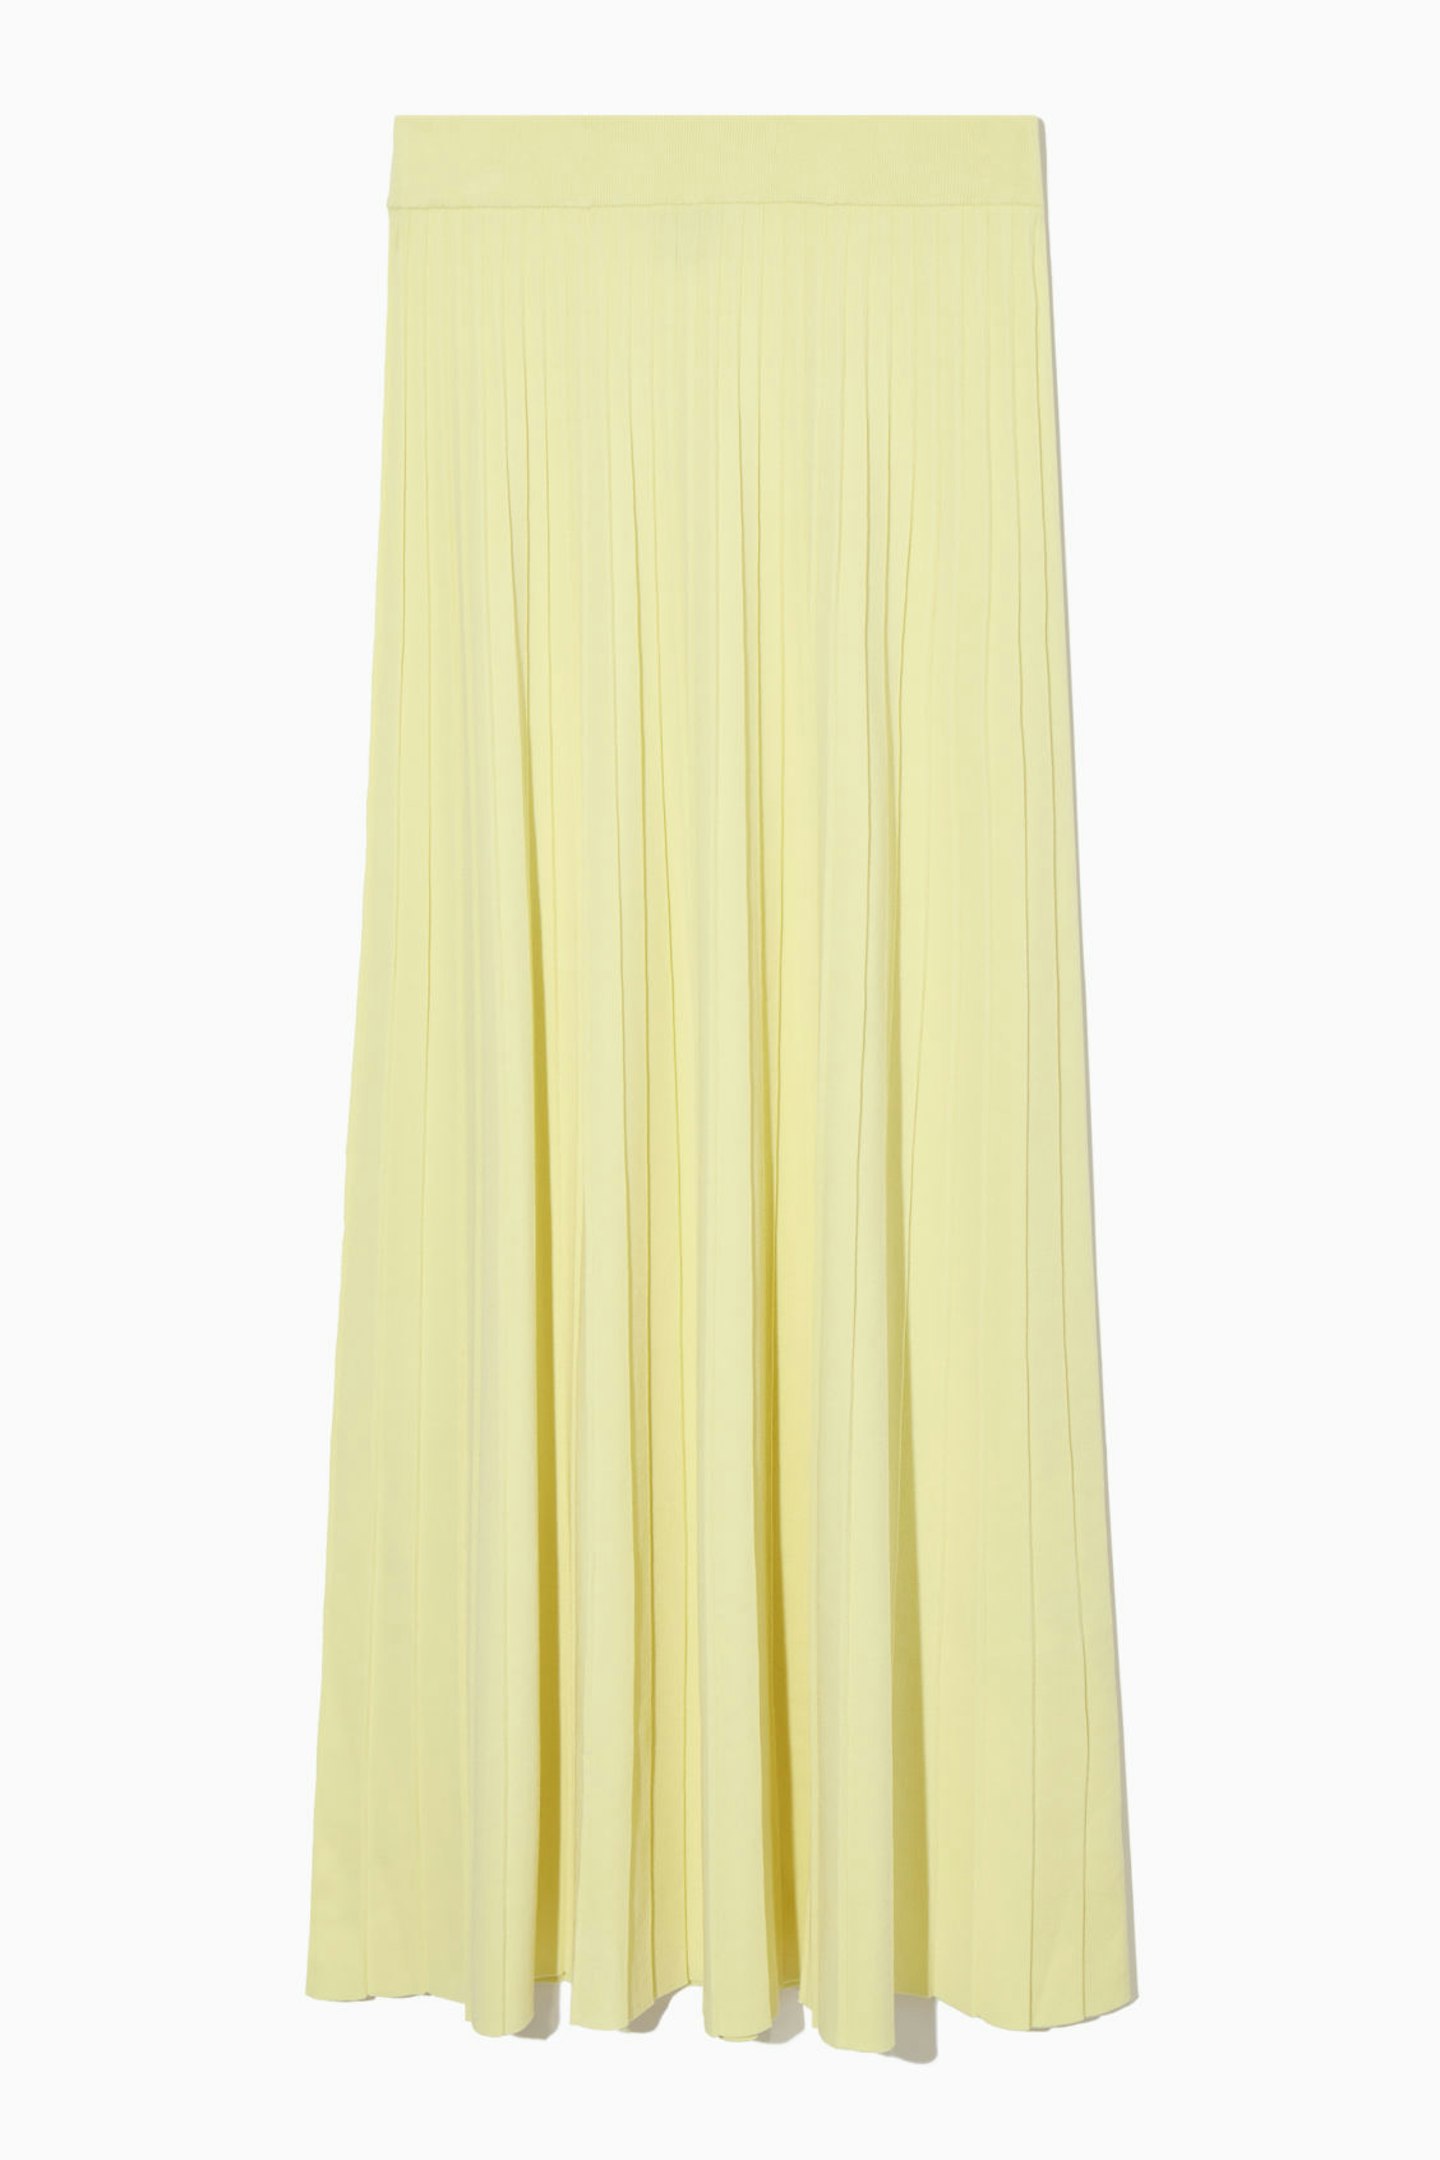 COS, Pleated Knitted Maxi Skirt